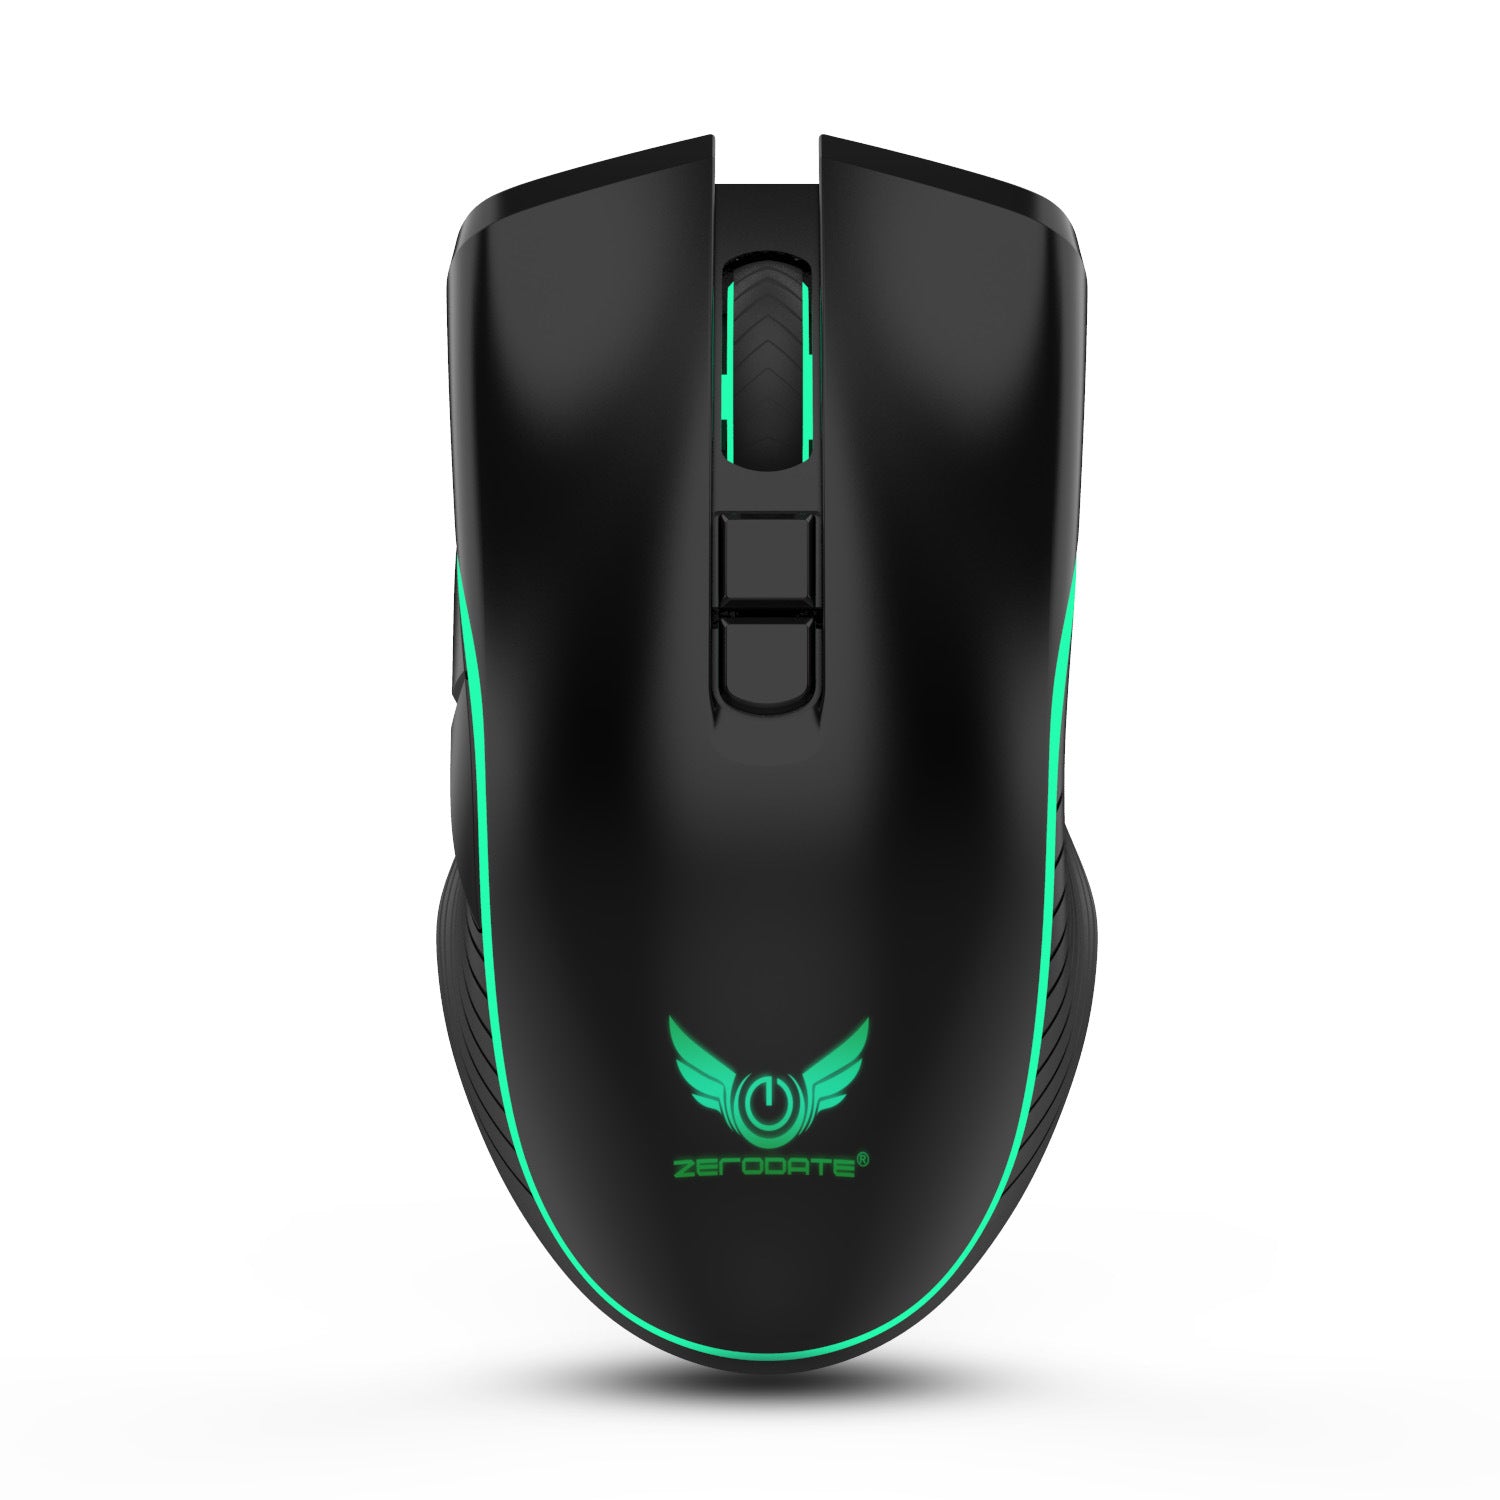 Rechargeable Interface, Seven-button Gaming Mouse, Fast Charging Mouse